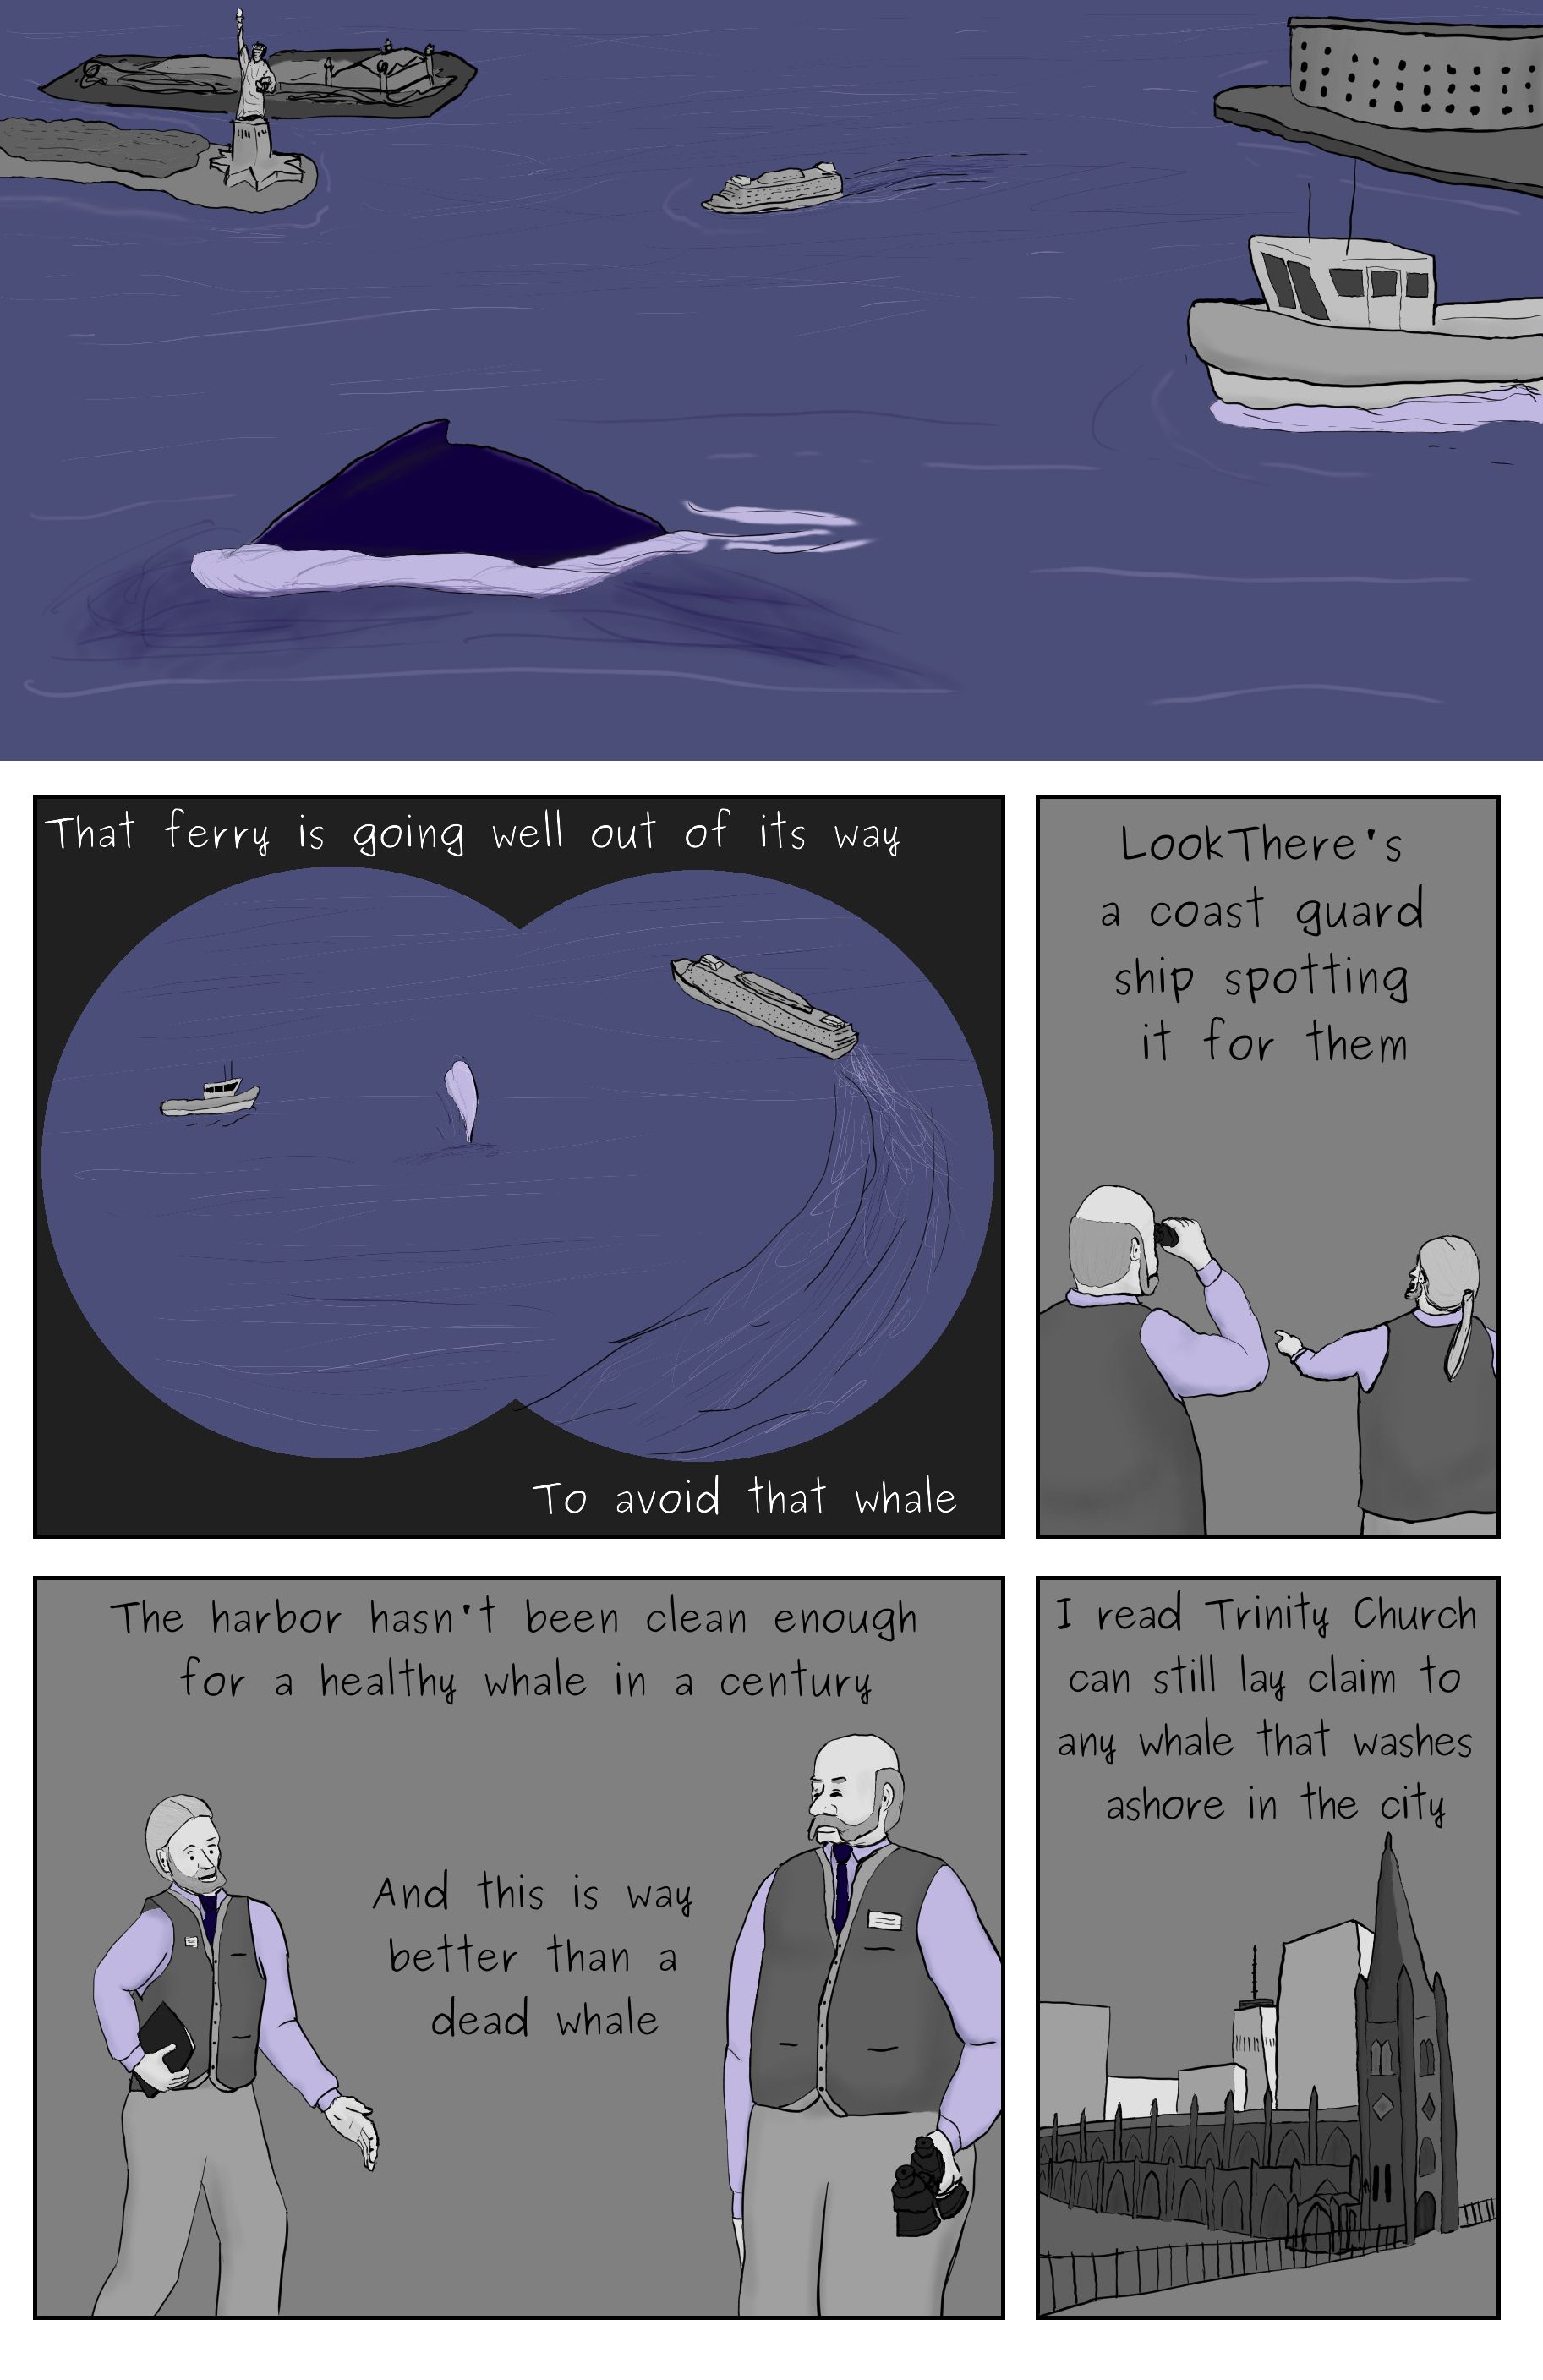 A comic featuring a close up of a whale's back breaching in New York Harbor, a binocular framed view of same whale bowing steam from blowhole, Phillip Gerba and coworker discussing whale, and Trinity Church.